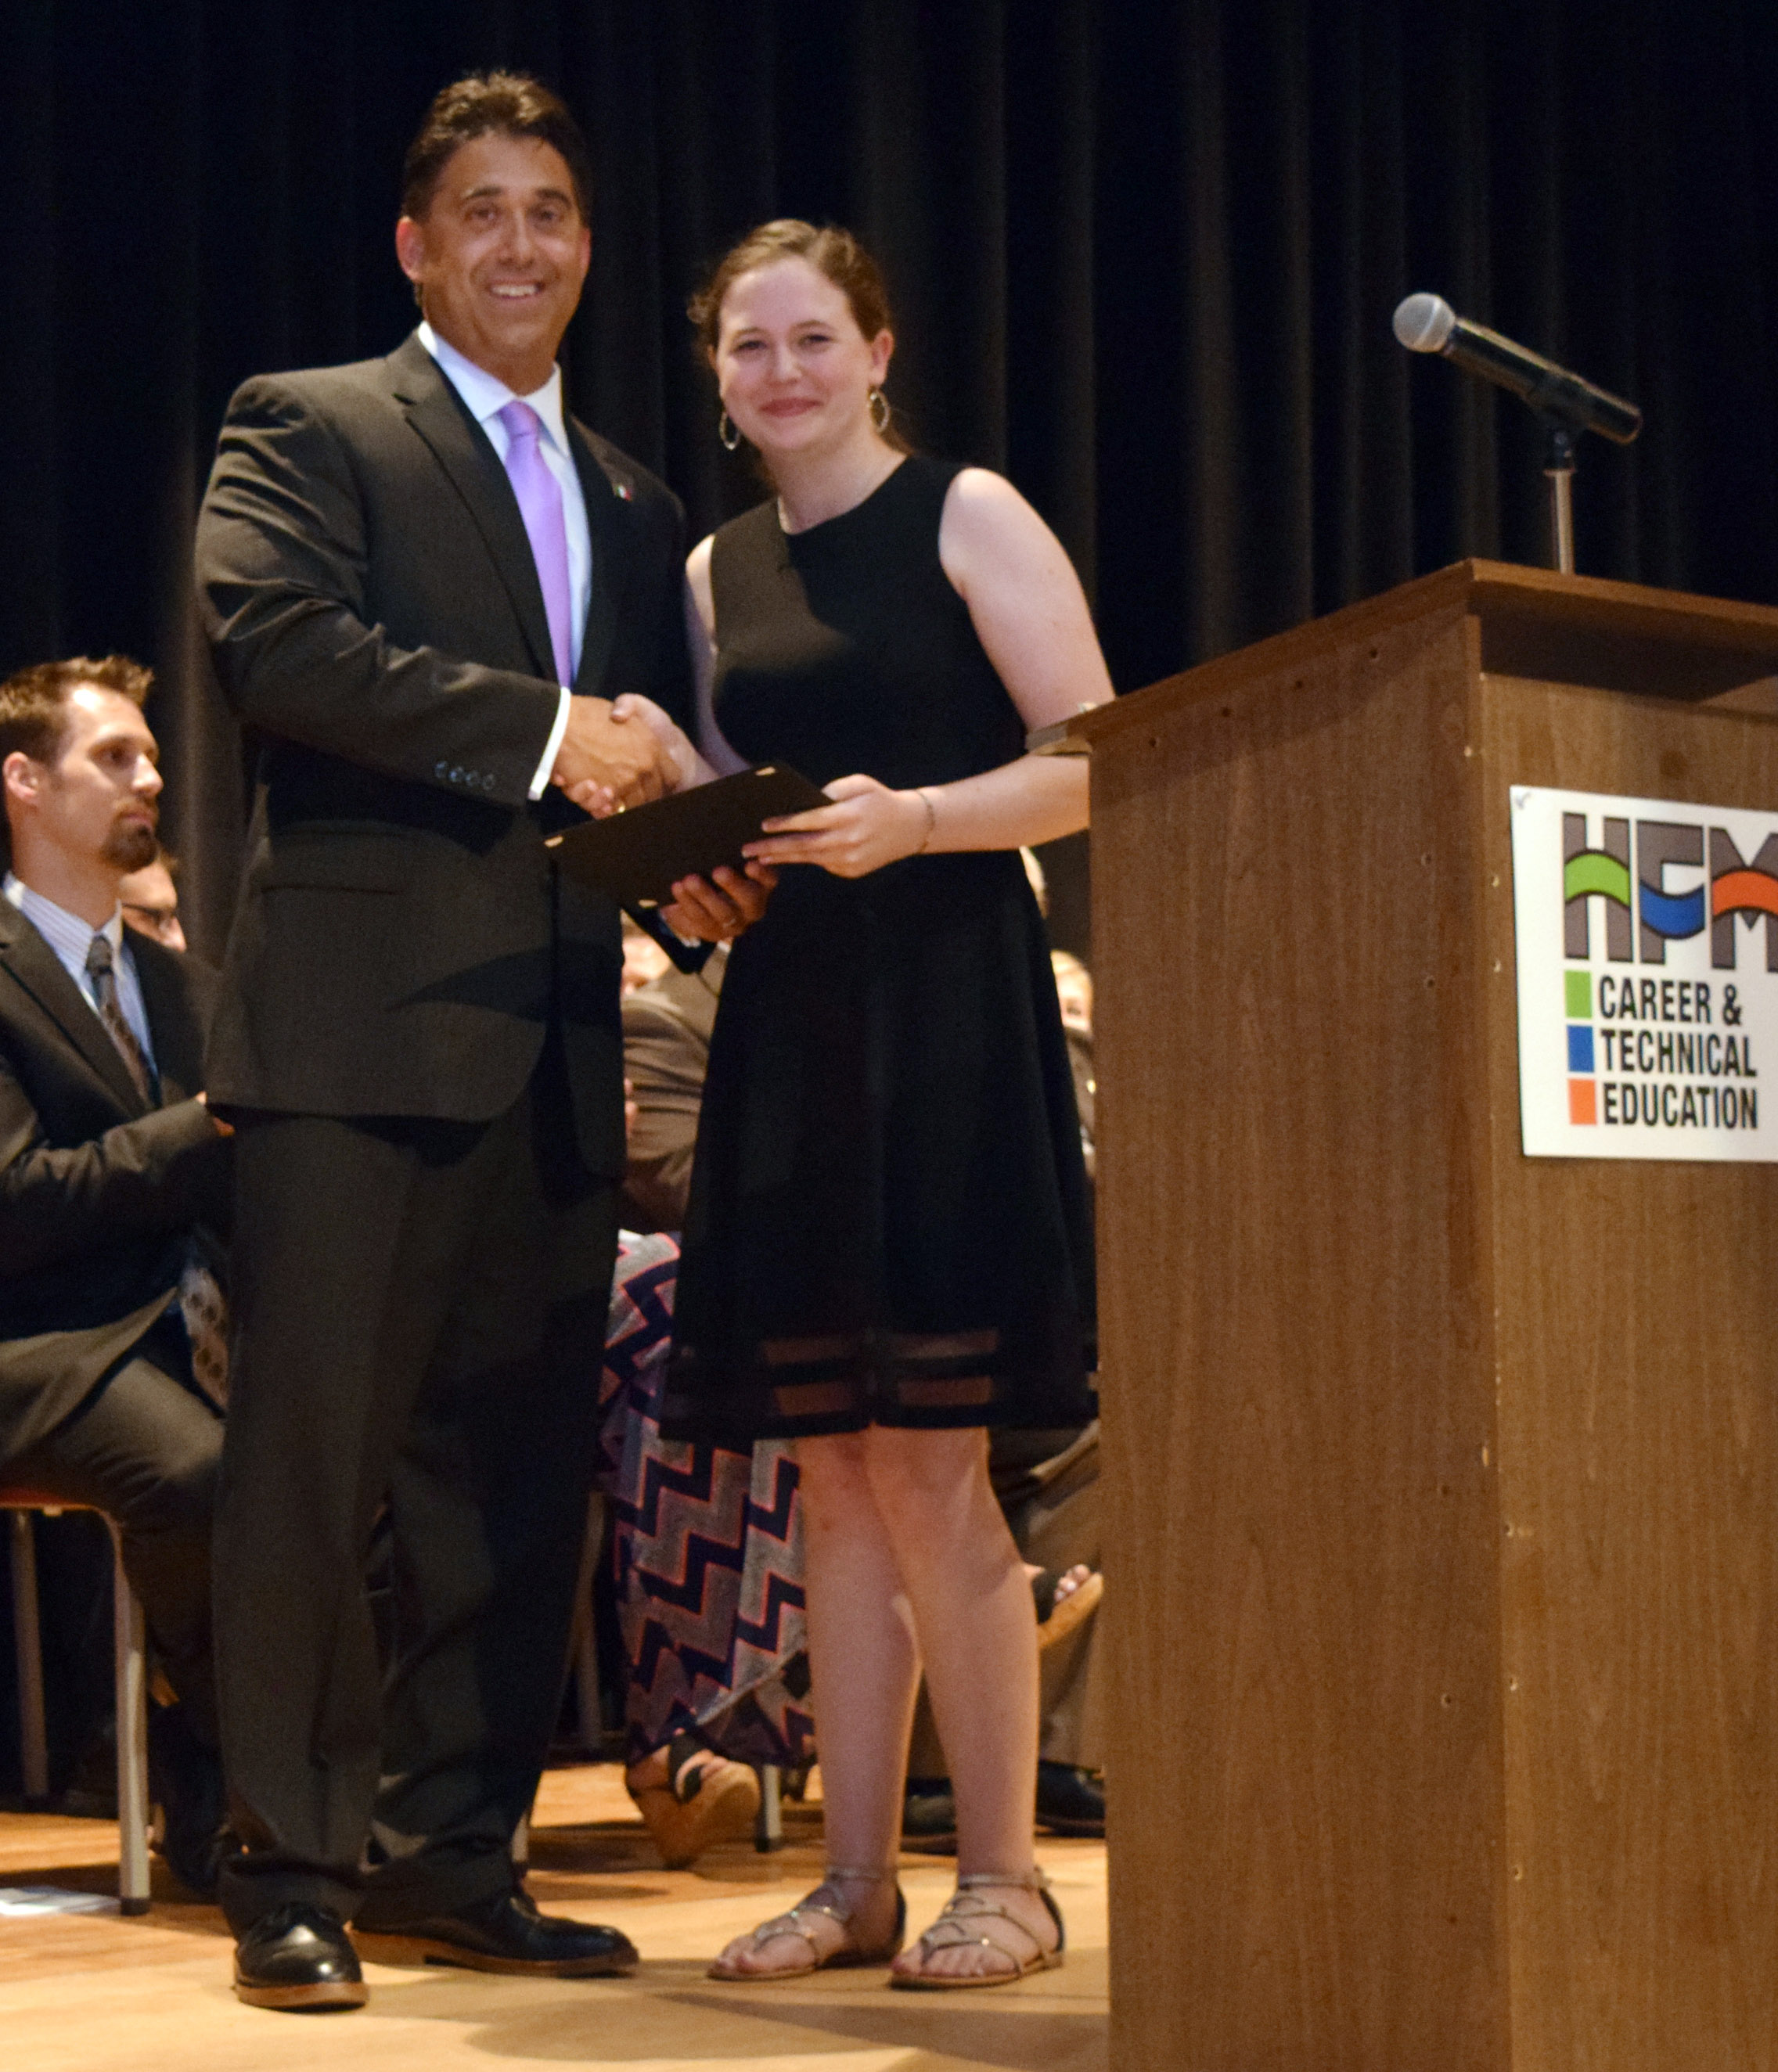 Anna King shakes hands with Mr. DeTraglia.